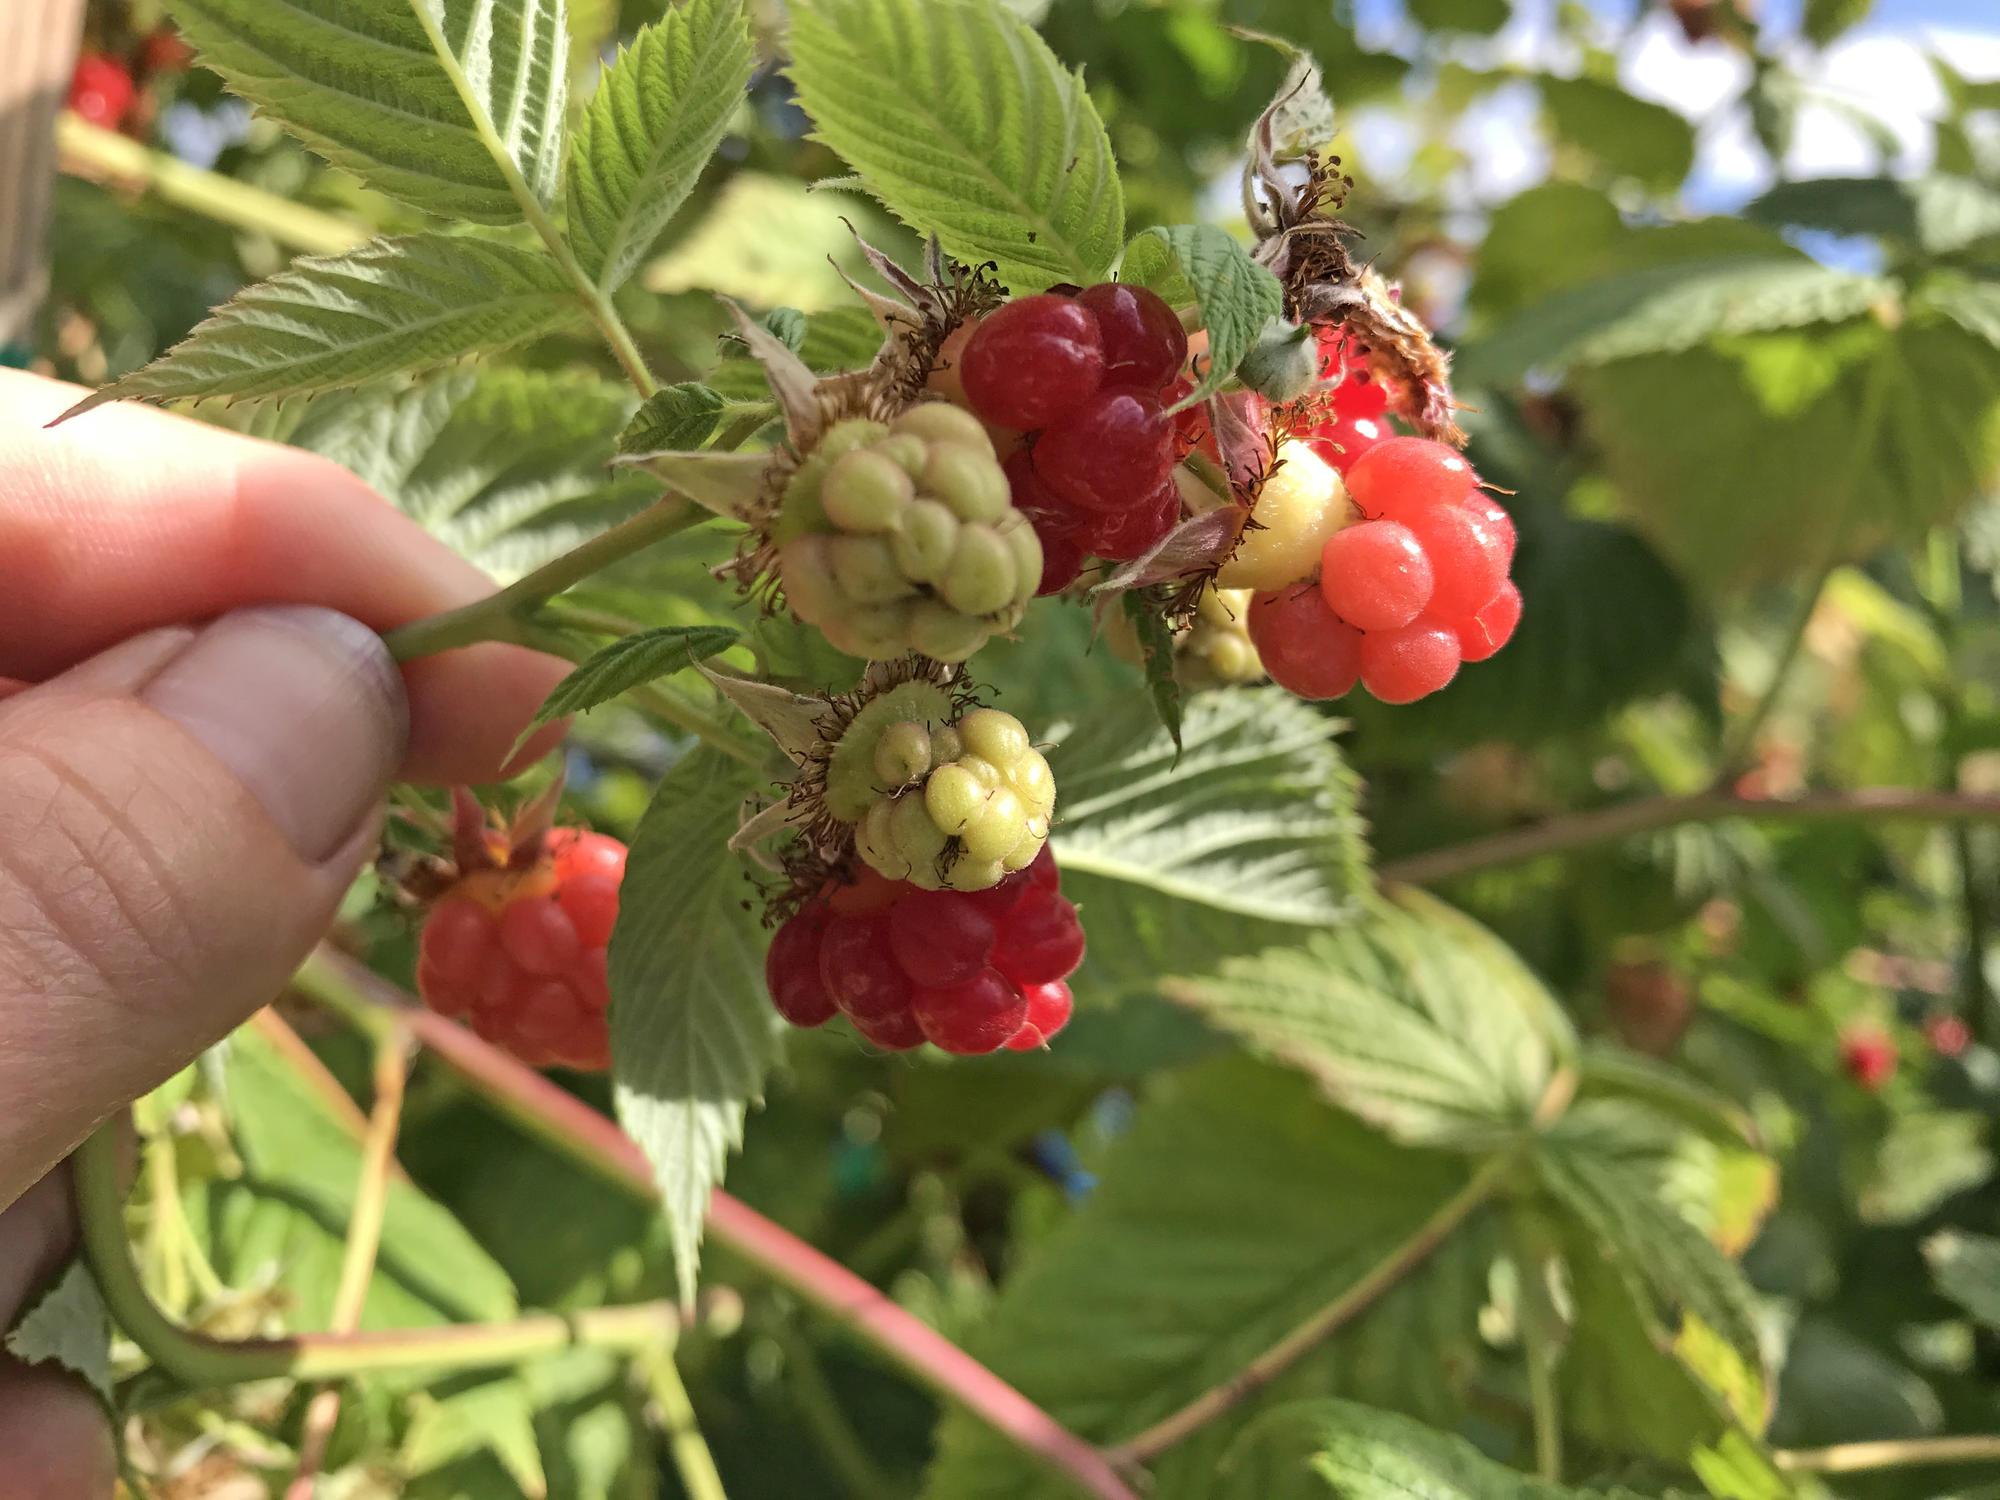 Growing Raspberries Garden Home in OSU Your Extension | Service